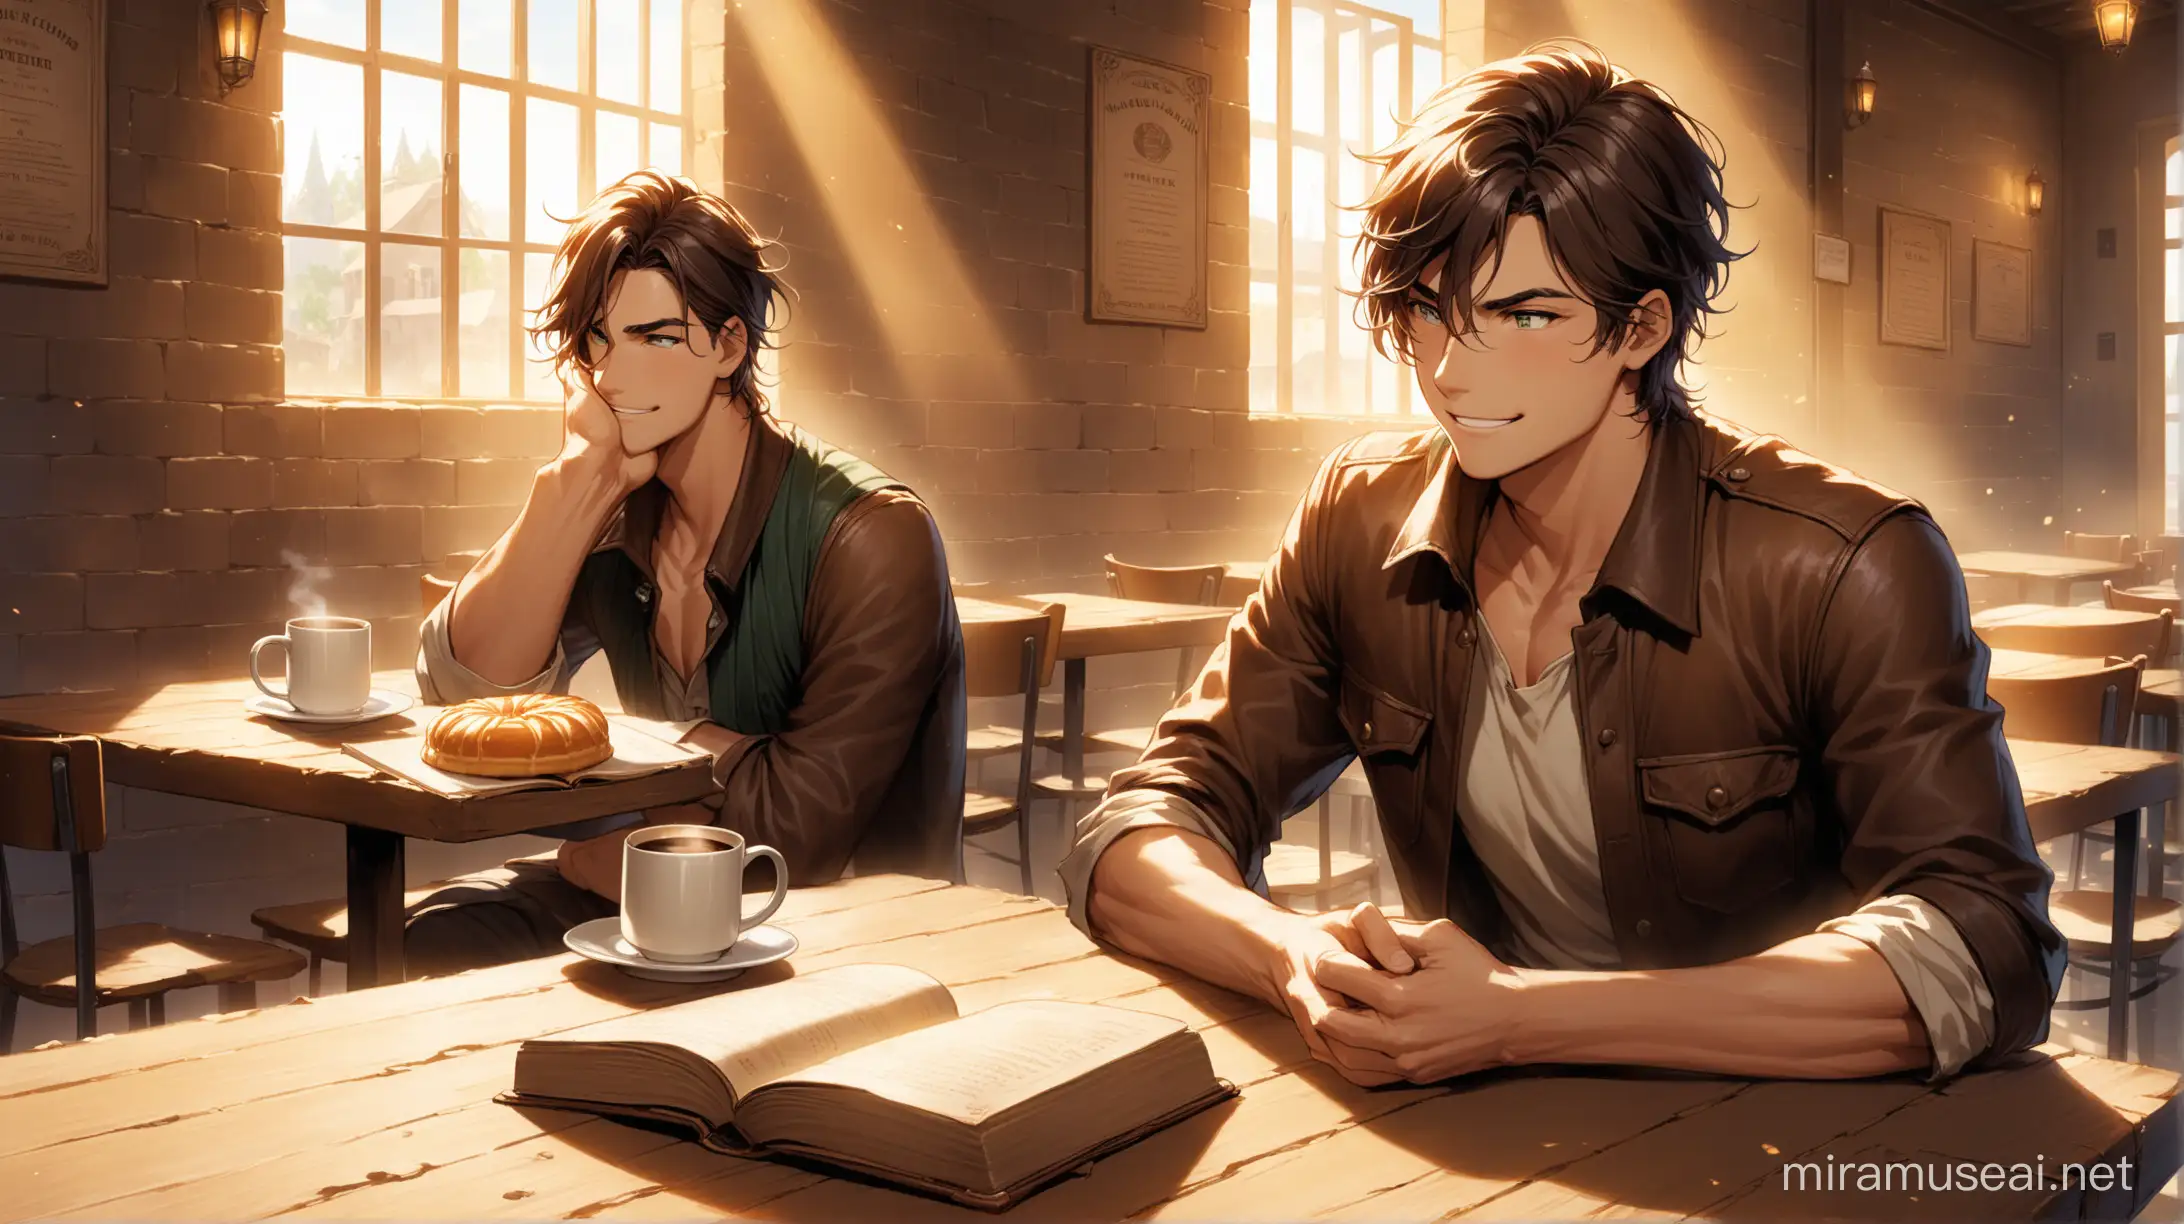 Imagine a sun-drenched coffee shop. Sunlight streams through dusty windows, illuminating worn tables and mismatched chairs. In the foreground, a young man with a calm face (Marcus) sits engrossed in a weathered leather book. Across from him, another young man (Leo) leans forward excitedly, mid-sentence. His grin hints at mischief, and his slightly disheveled hair suggests he rushed in. Marcus listens, a hint of a smile playing on his lips, but a touch of seriousness lingers in his eyes. Between them, two empty mugs and a half-eaten pastry rest on the table. Capture the warmth of their friendship alongside the subtle tension of setting boundaries.